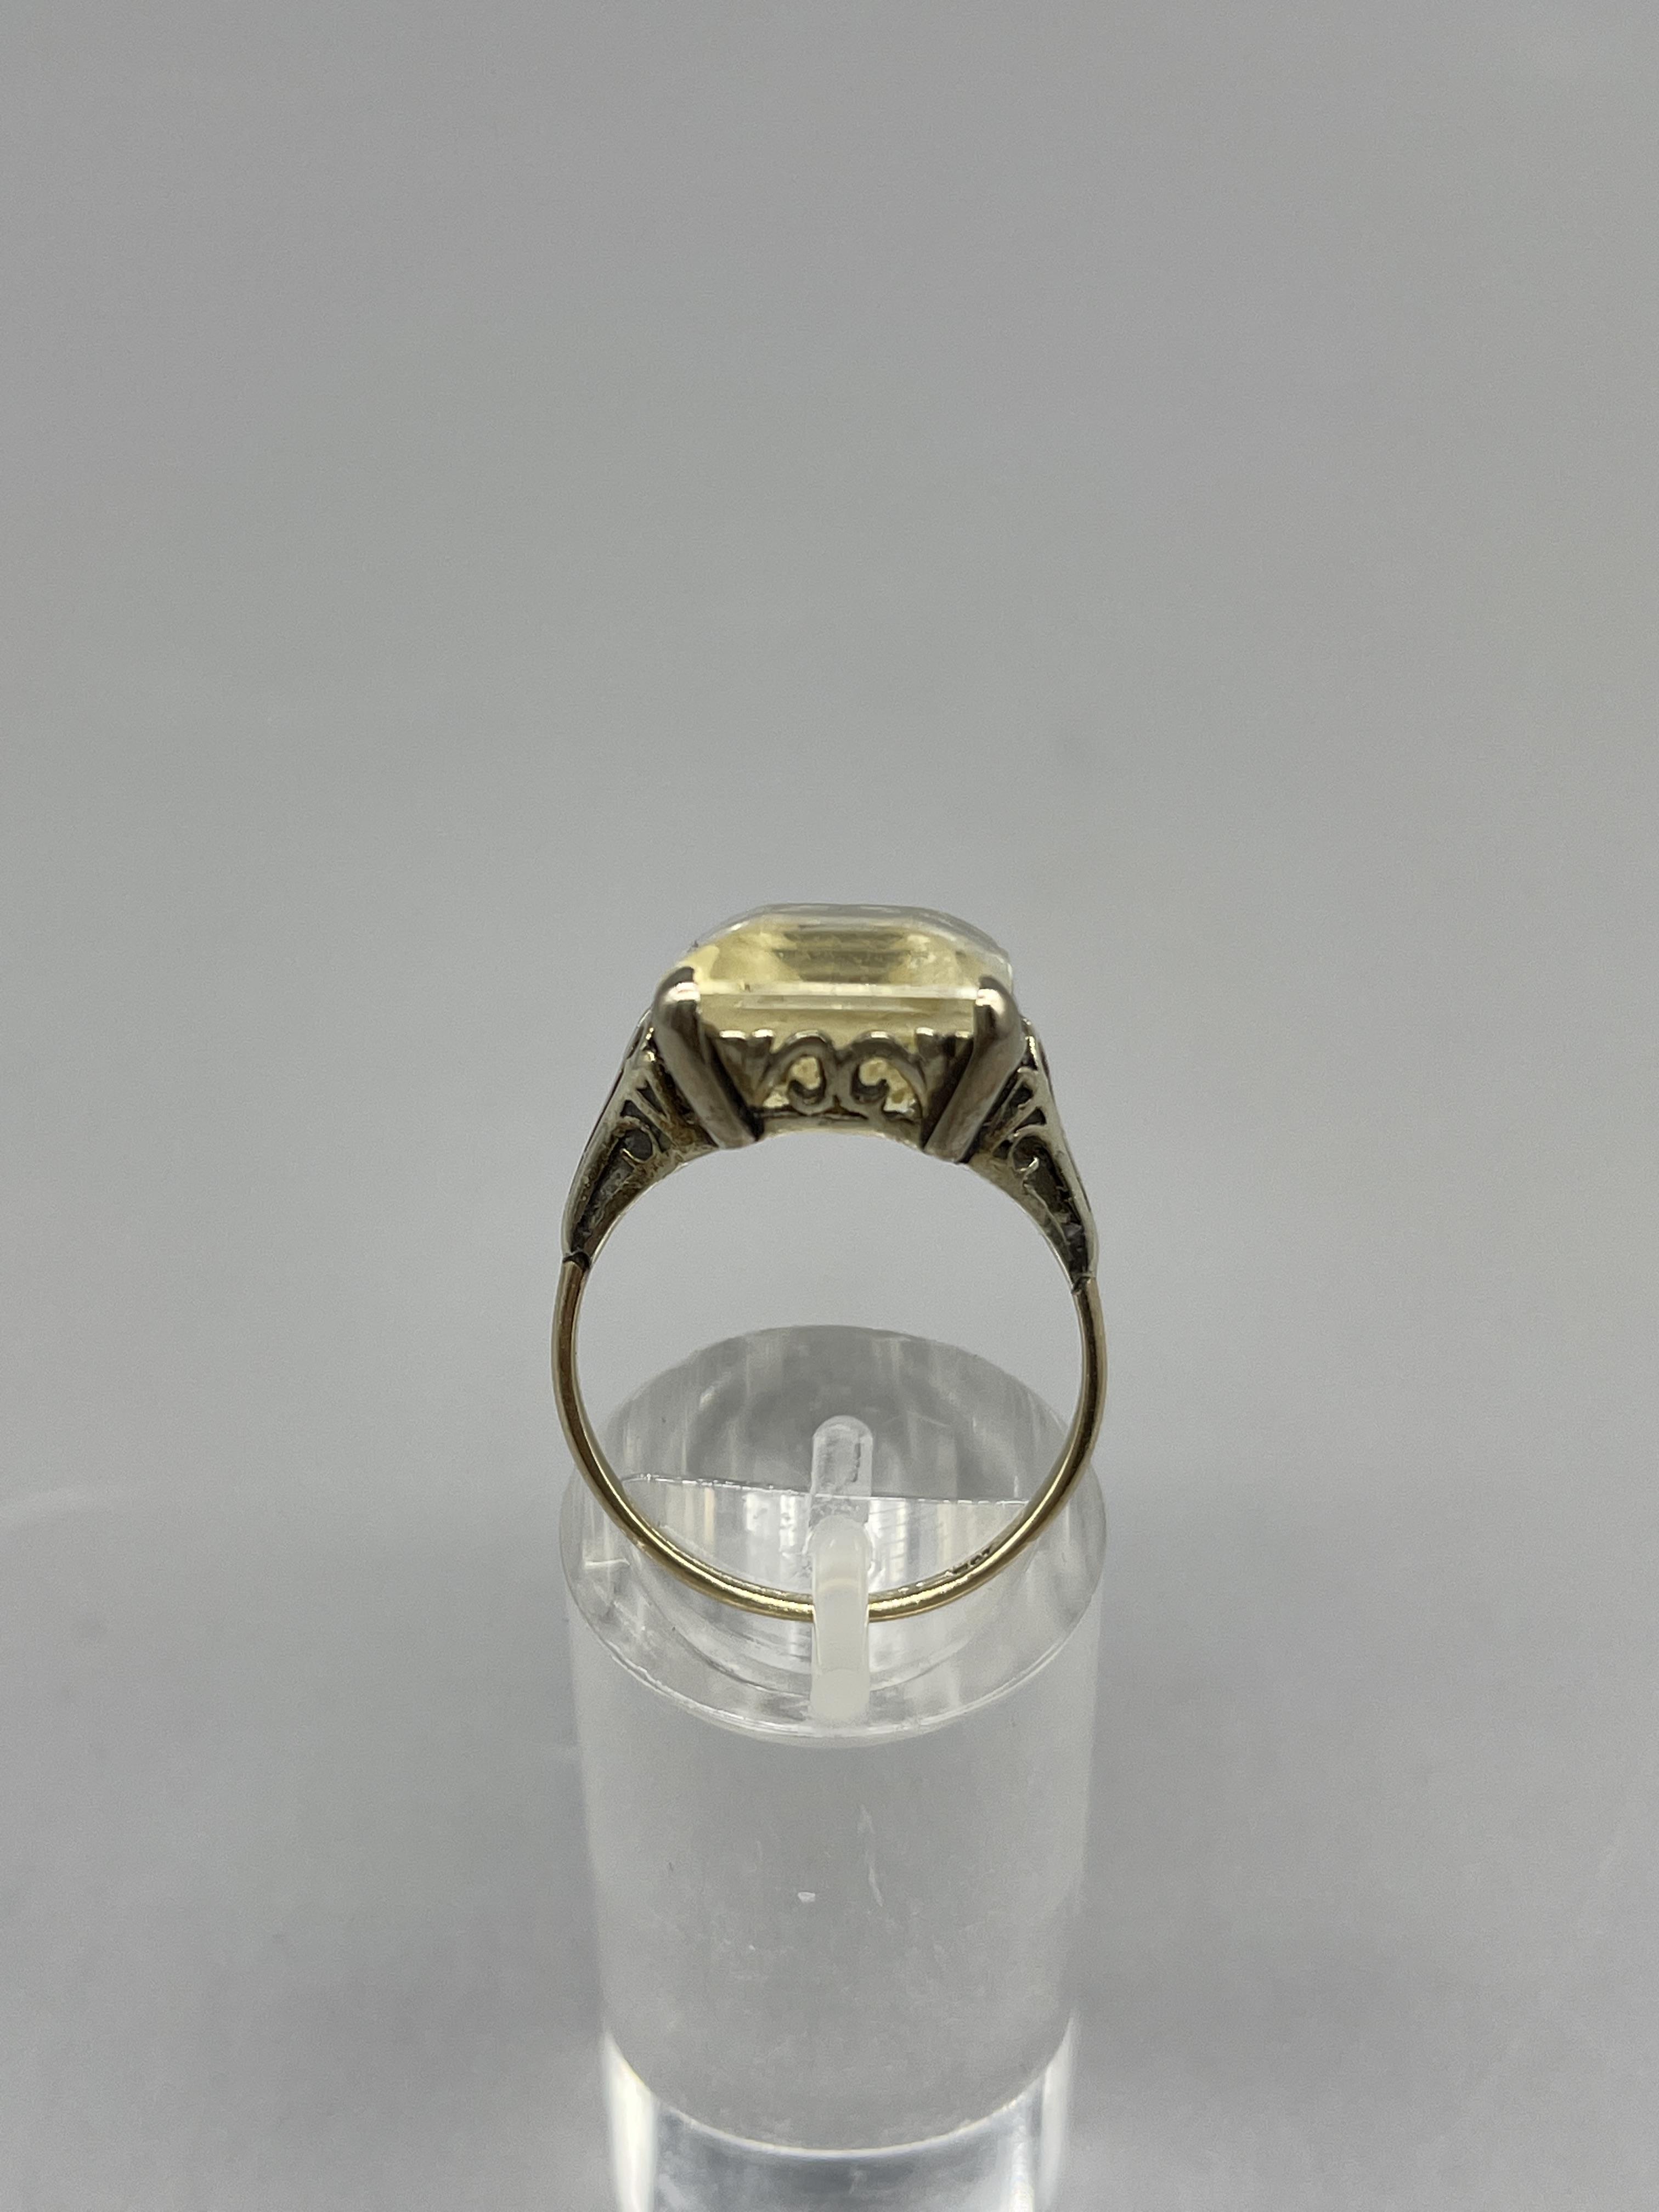 9ct citrine dress ring, weight 5 grams - Image 3 of 7